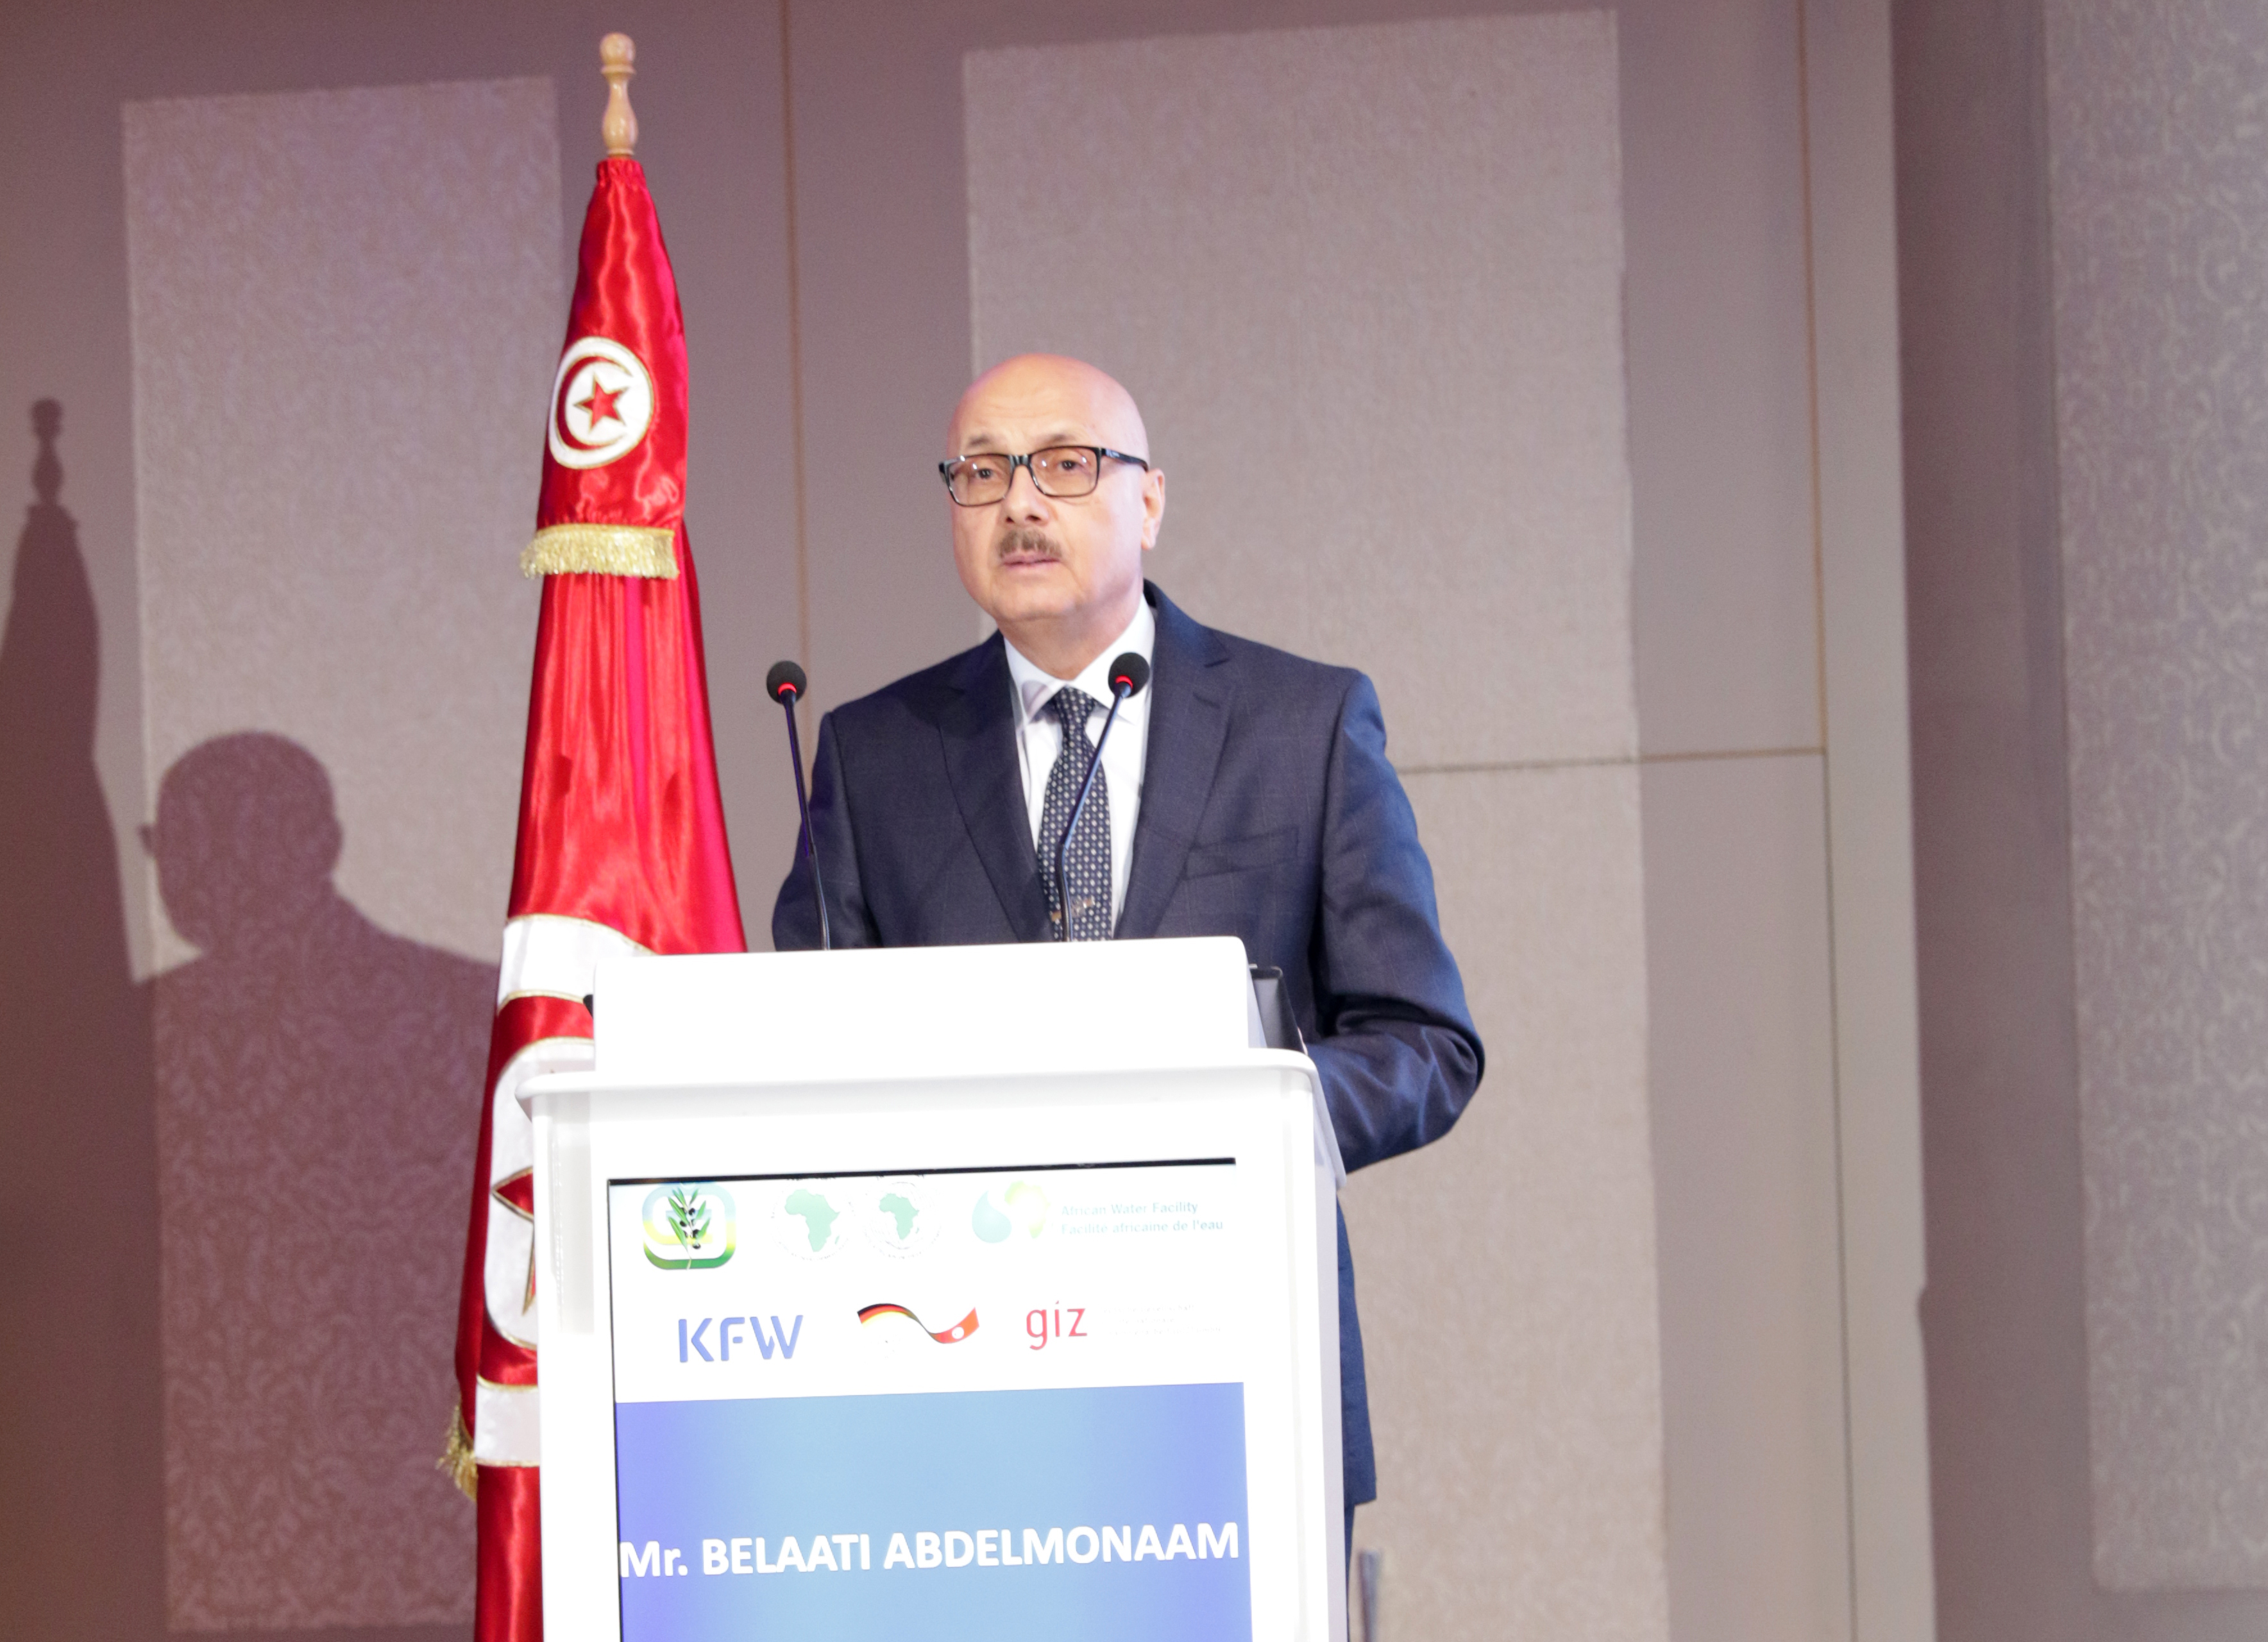 Regional workshop on the Tunisian vision and strategy for the water sector by 2050